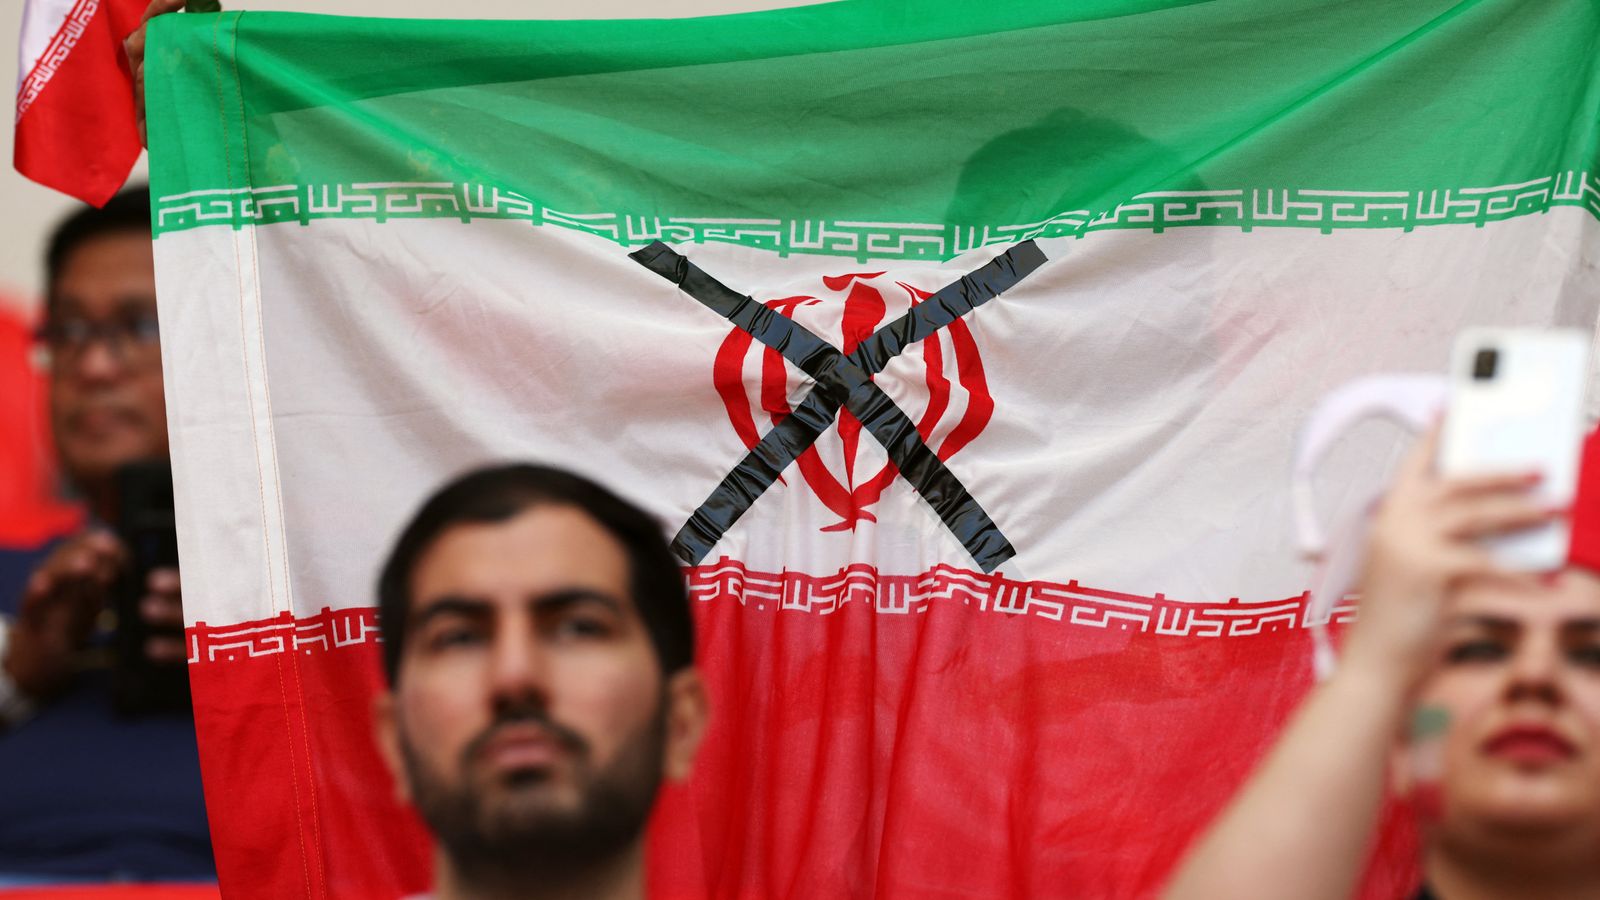 Iran regime supporters and protesters confront each other ahead of World Cup match against Wales